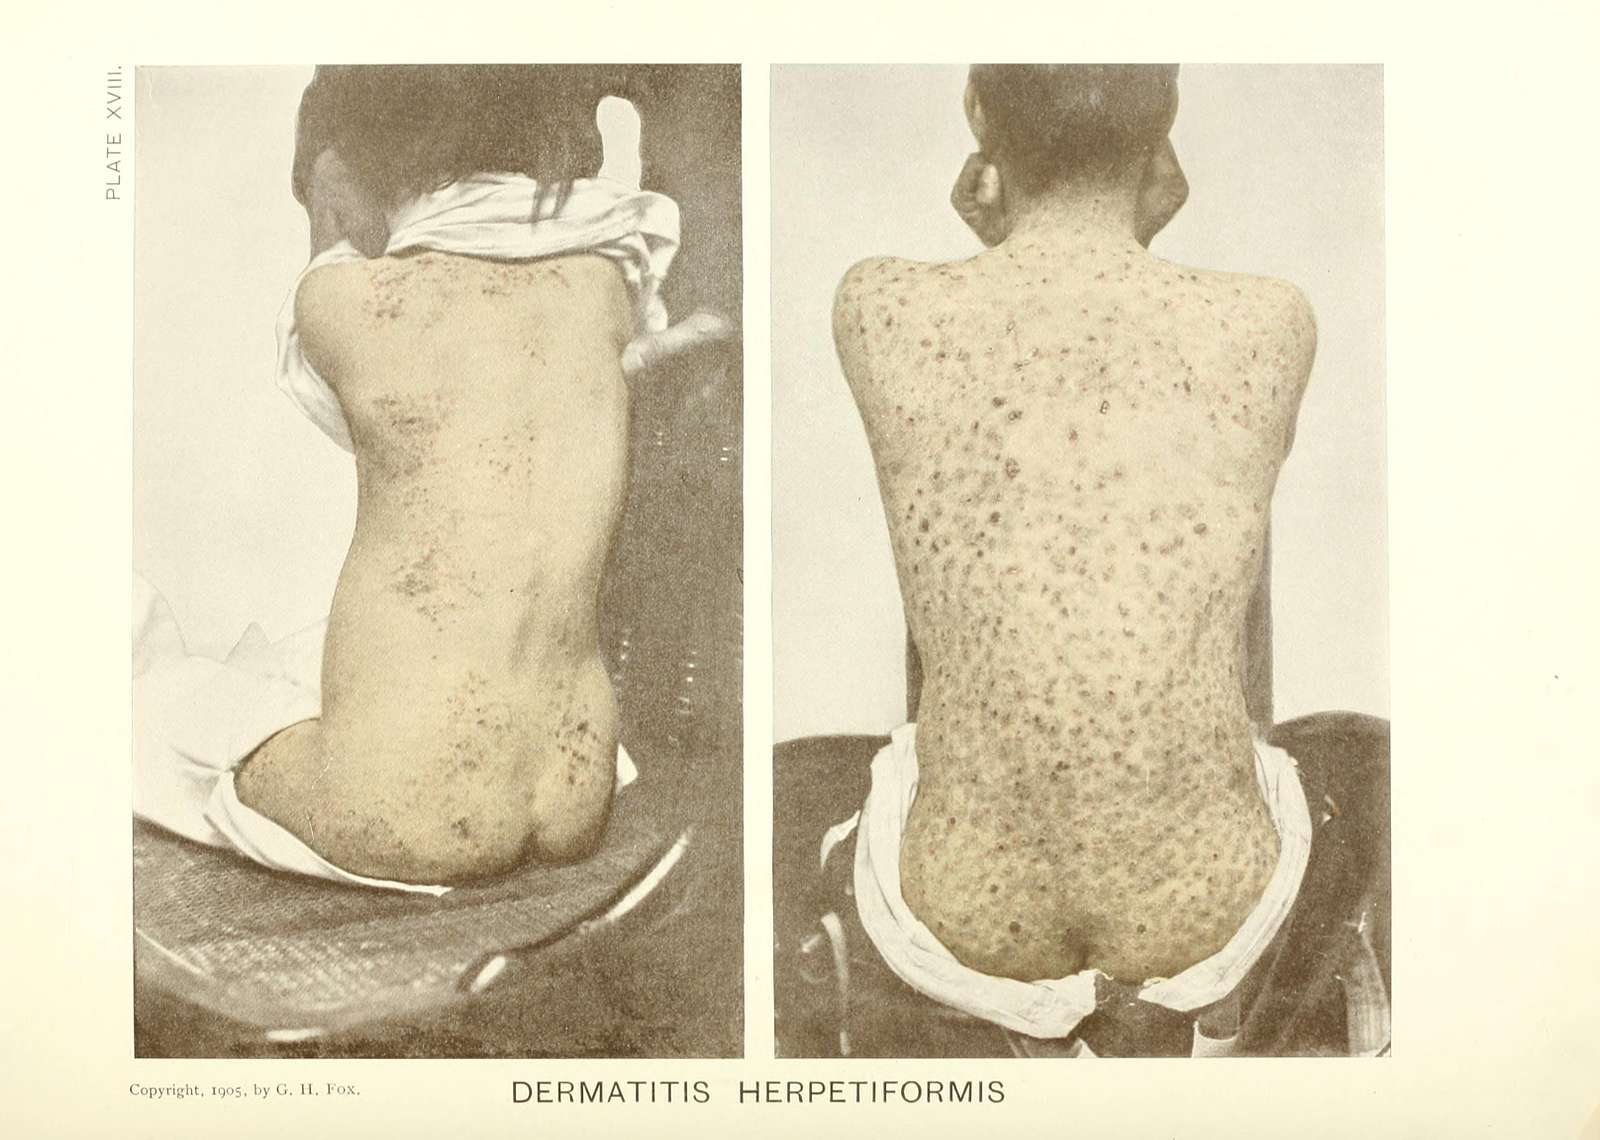 https://cdn2.picryl.com/photo/1905/12/31/photographic-atlas-of-the-diseases-of-the-skin-a-series-of-ninety-six-plates-d8667b-1600.jpg